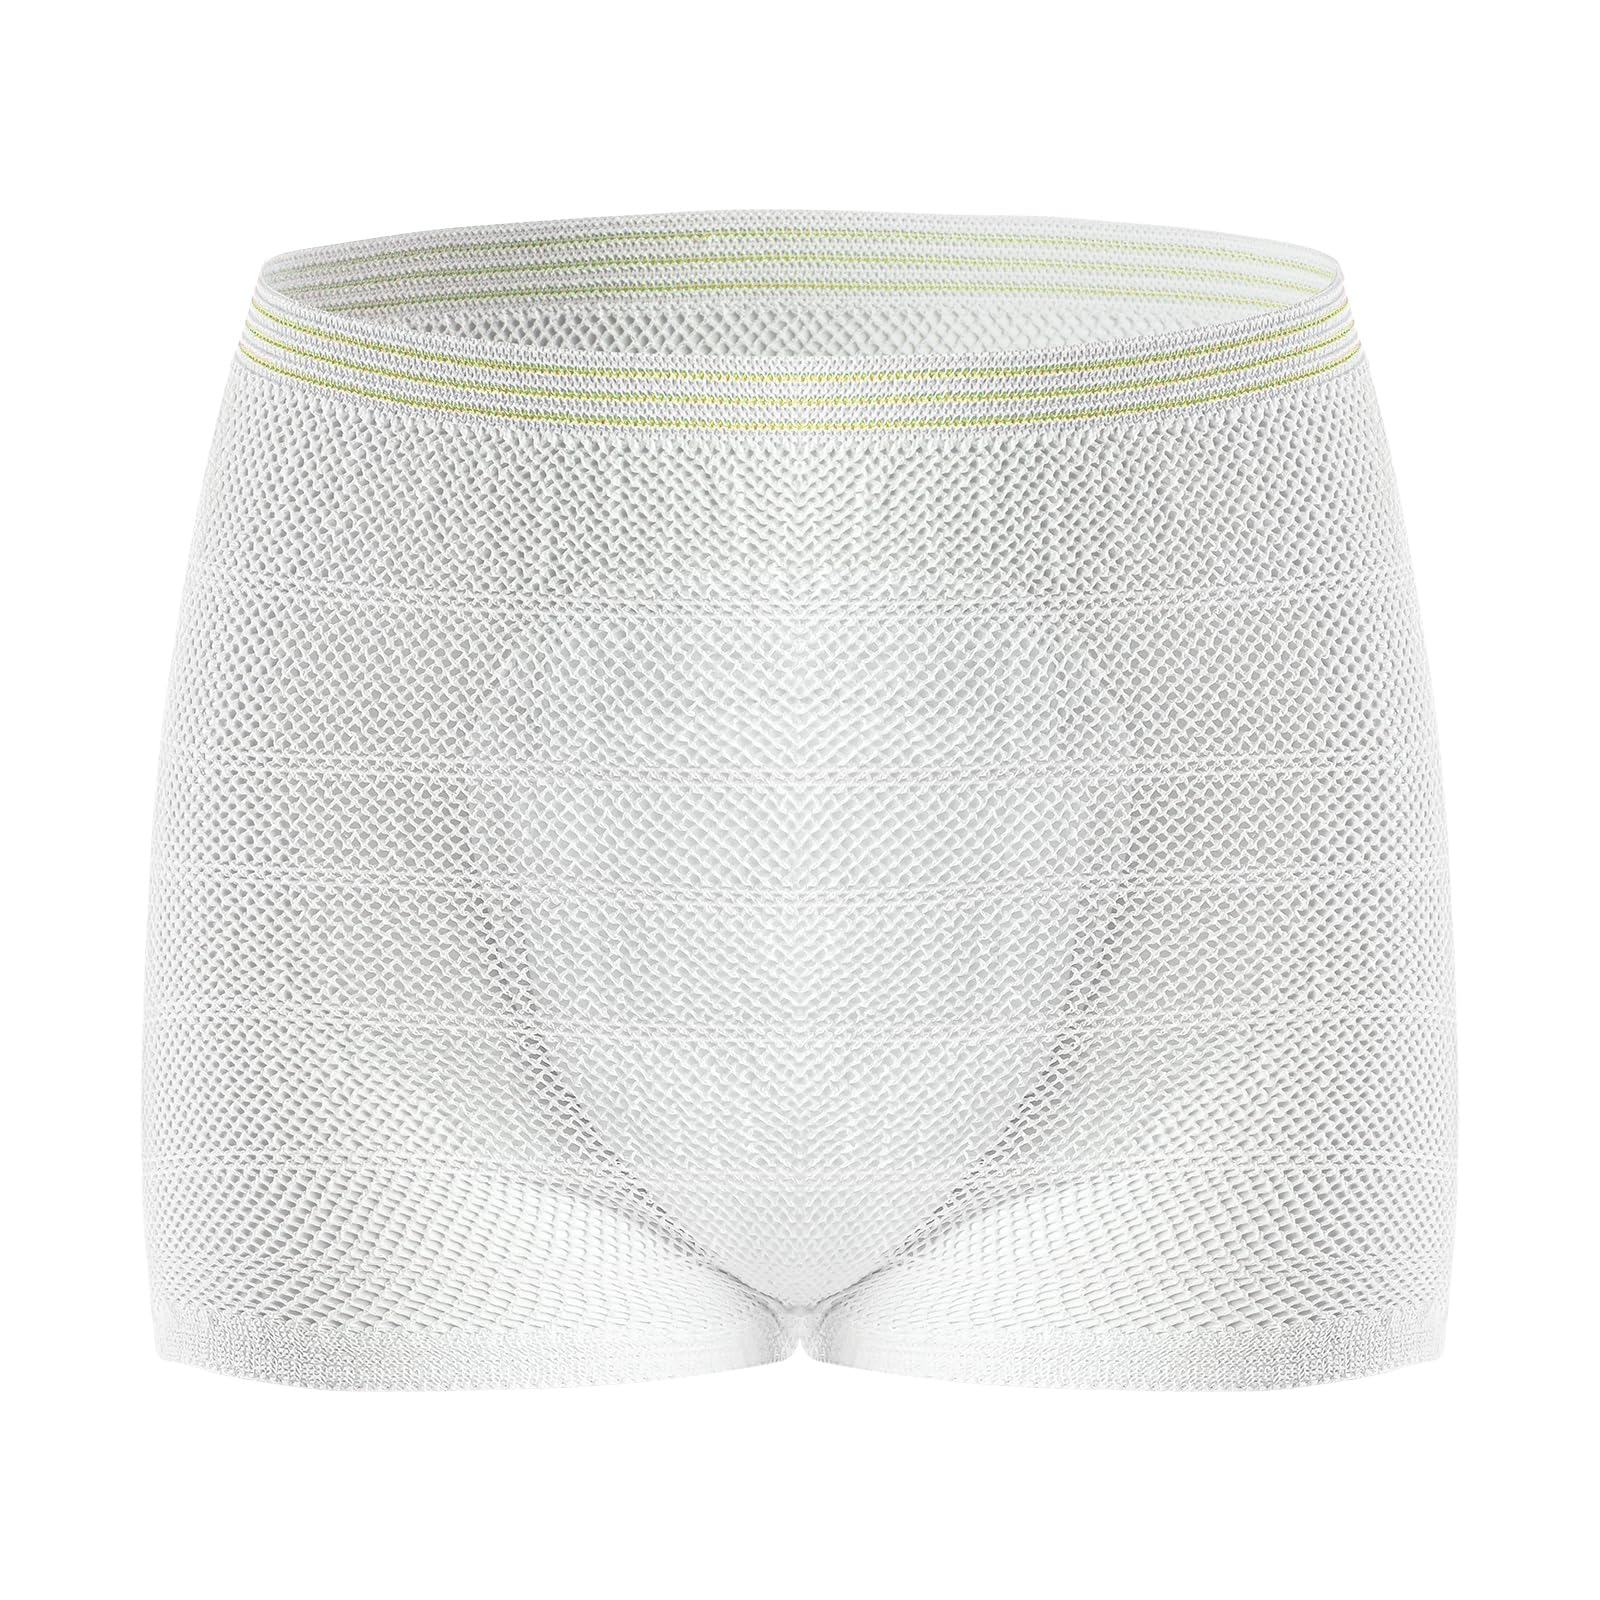 HANSILK Seamless Mesh Postpartum Underwear Natural C-Section Delivery Post  Surgical Recovery Disposable Women's Panties